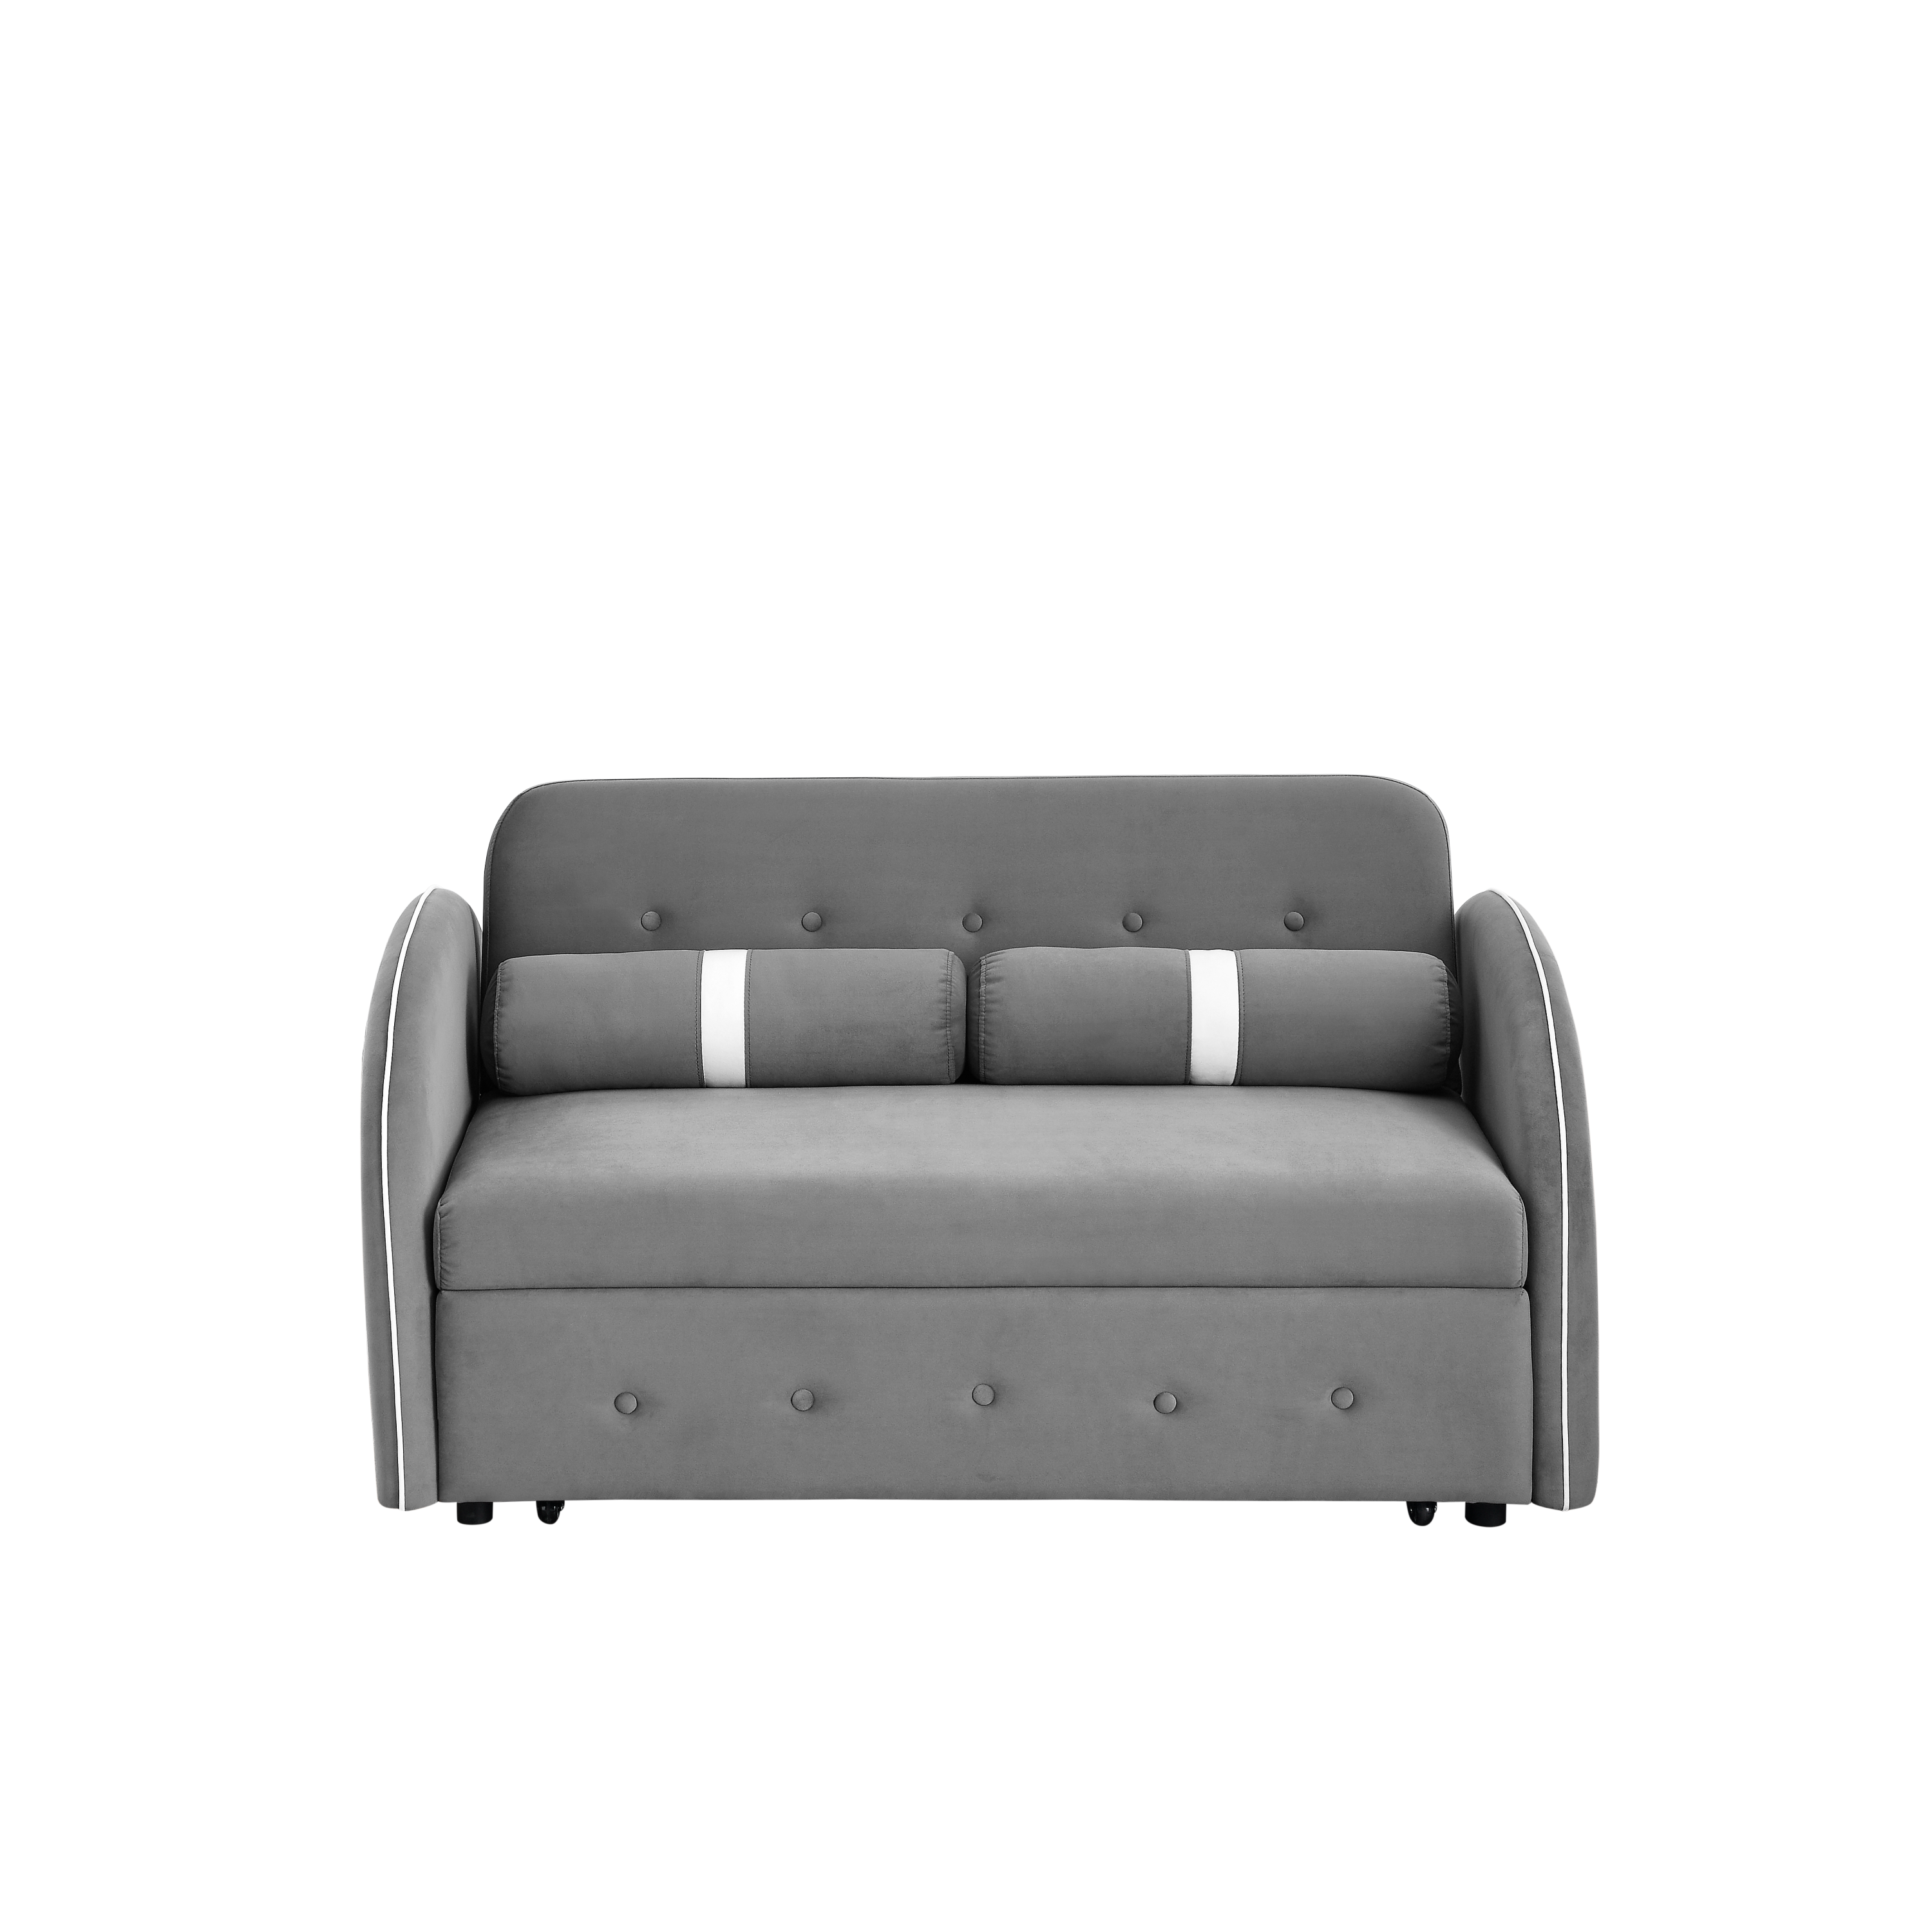 Cora Gray Velvet 55.5" Pull Out Sleep Sofa Bed 2 Seater Loveseats Sofa Couch with Side Pockets, Adjustable Backrest and Lumbar Pillows